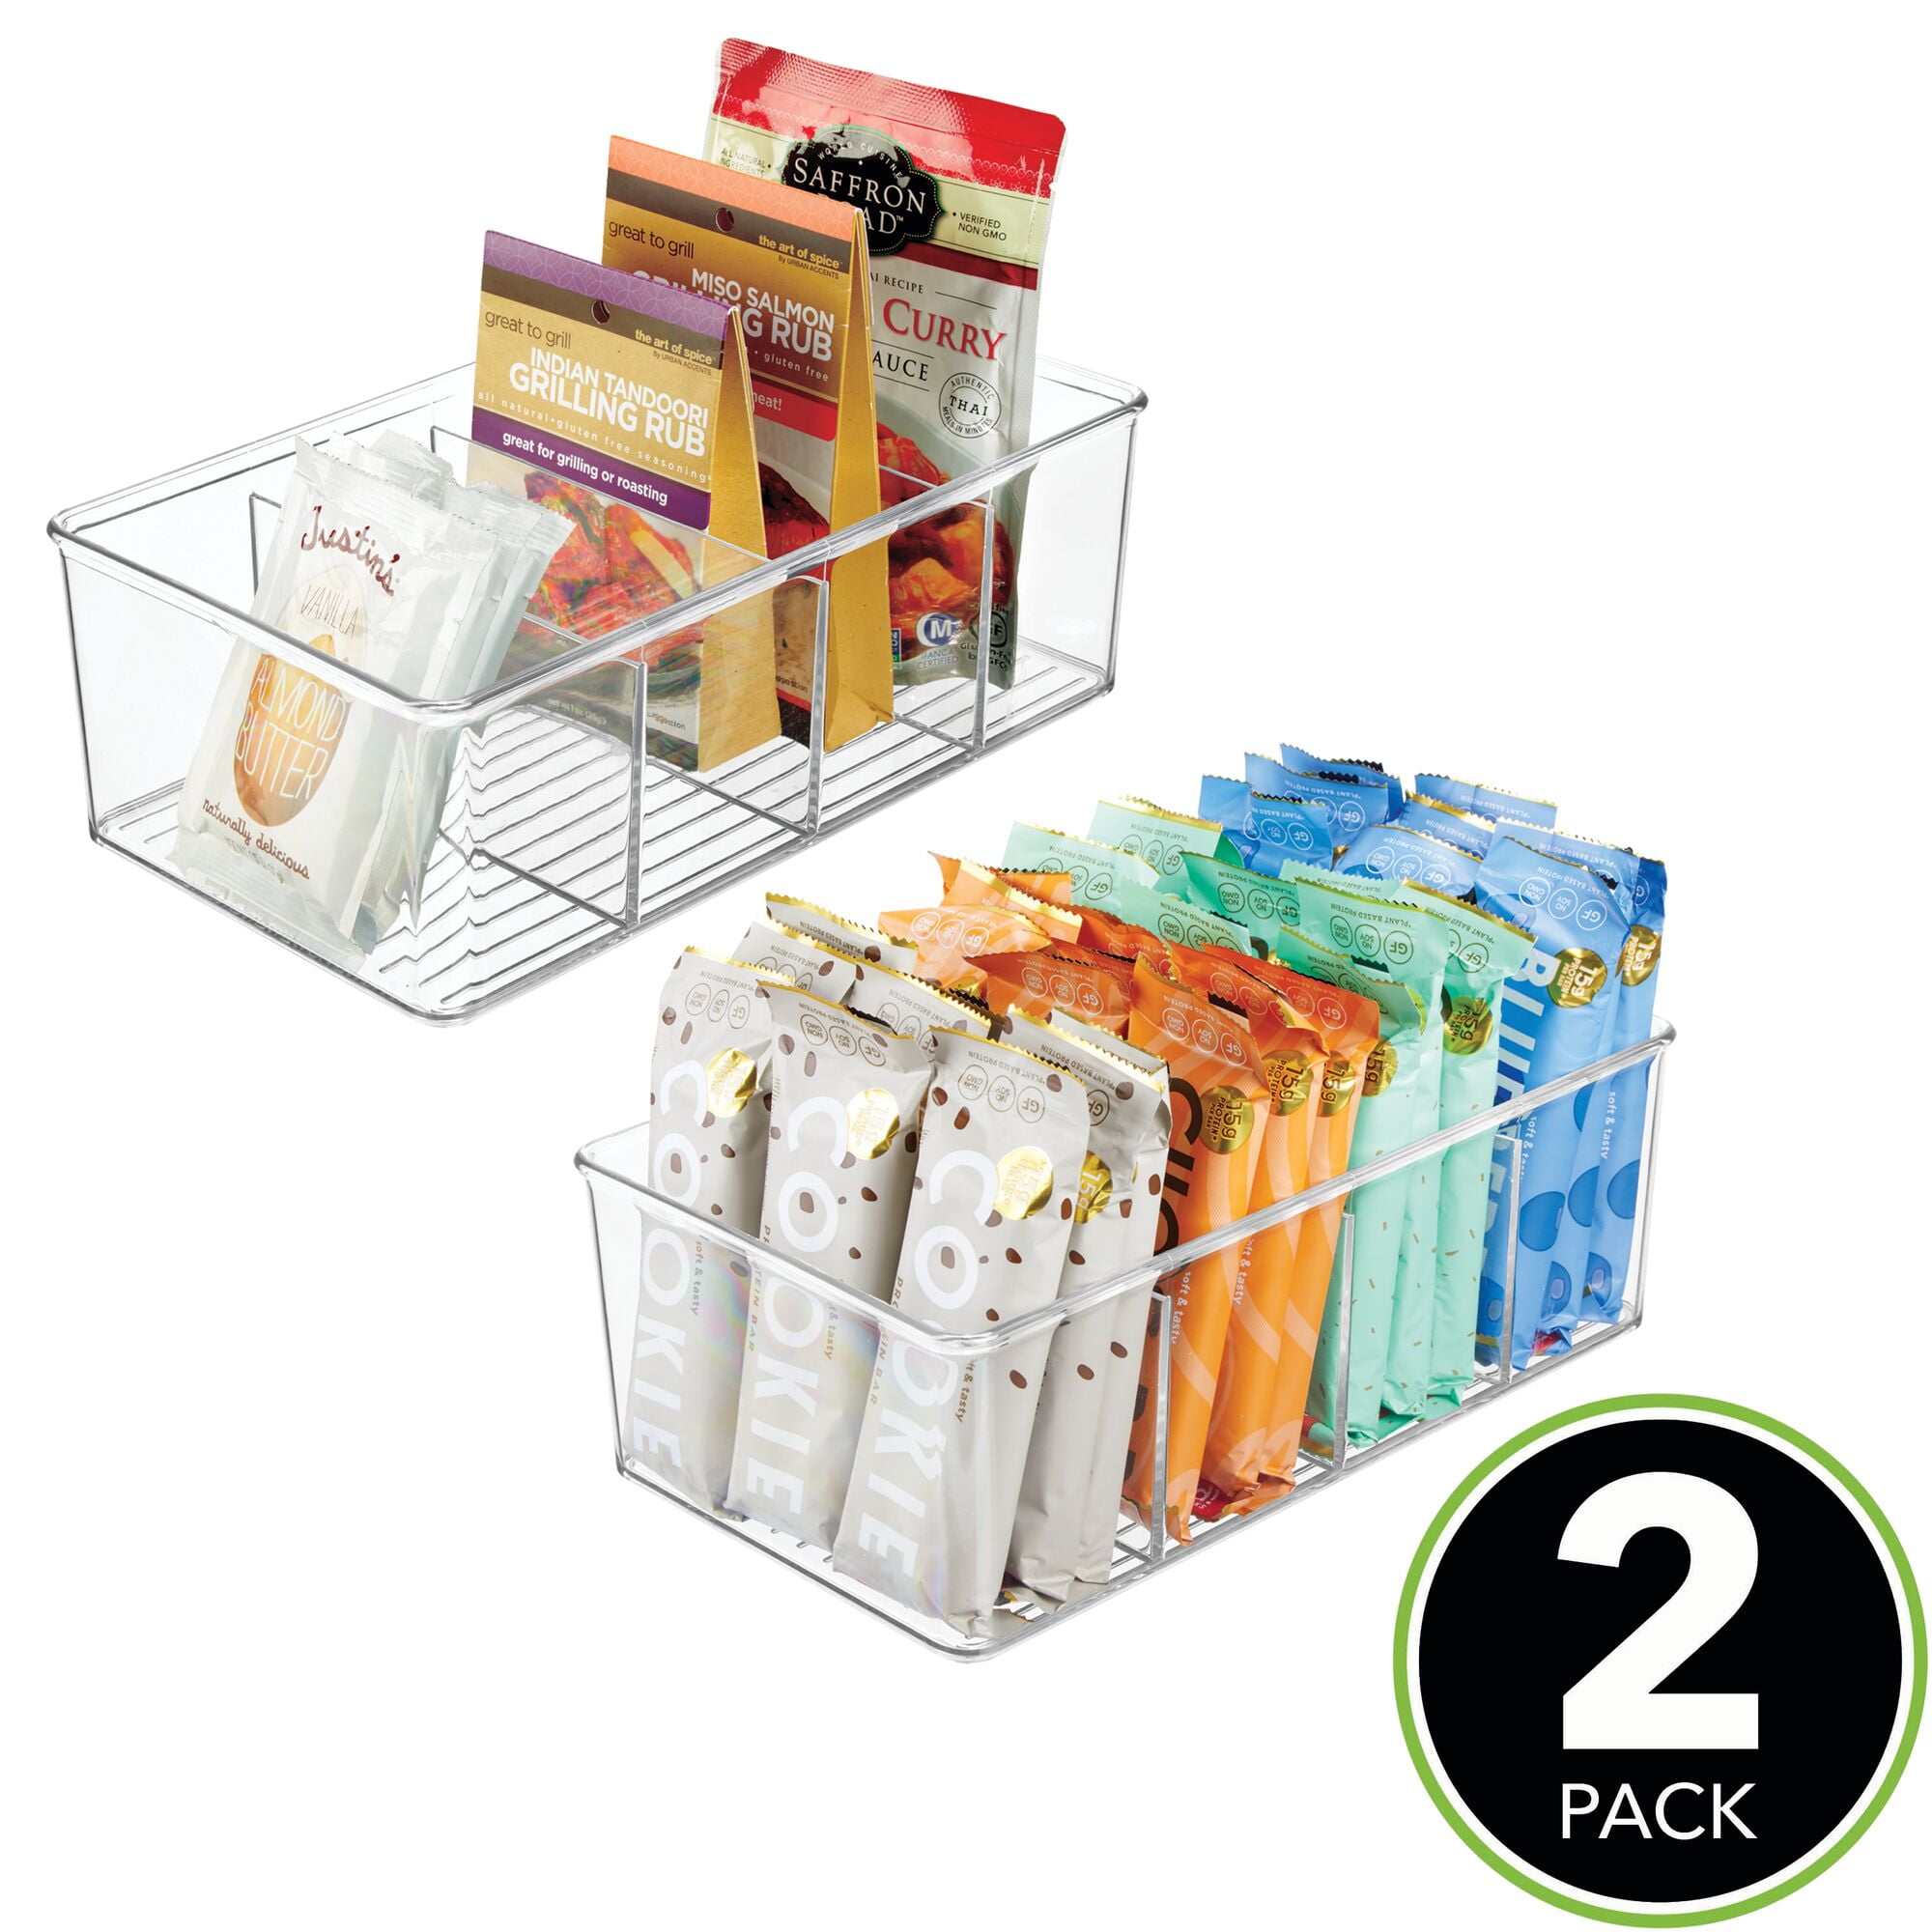 6 Pack Clear Plastic Storage Bins with Lids, Vtopmart Pantry Organizer Bins,  for Cabinet, Kitchen, Countertops, Large 